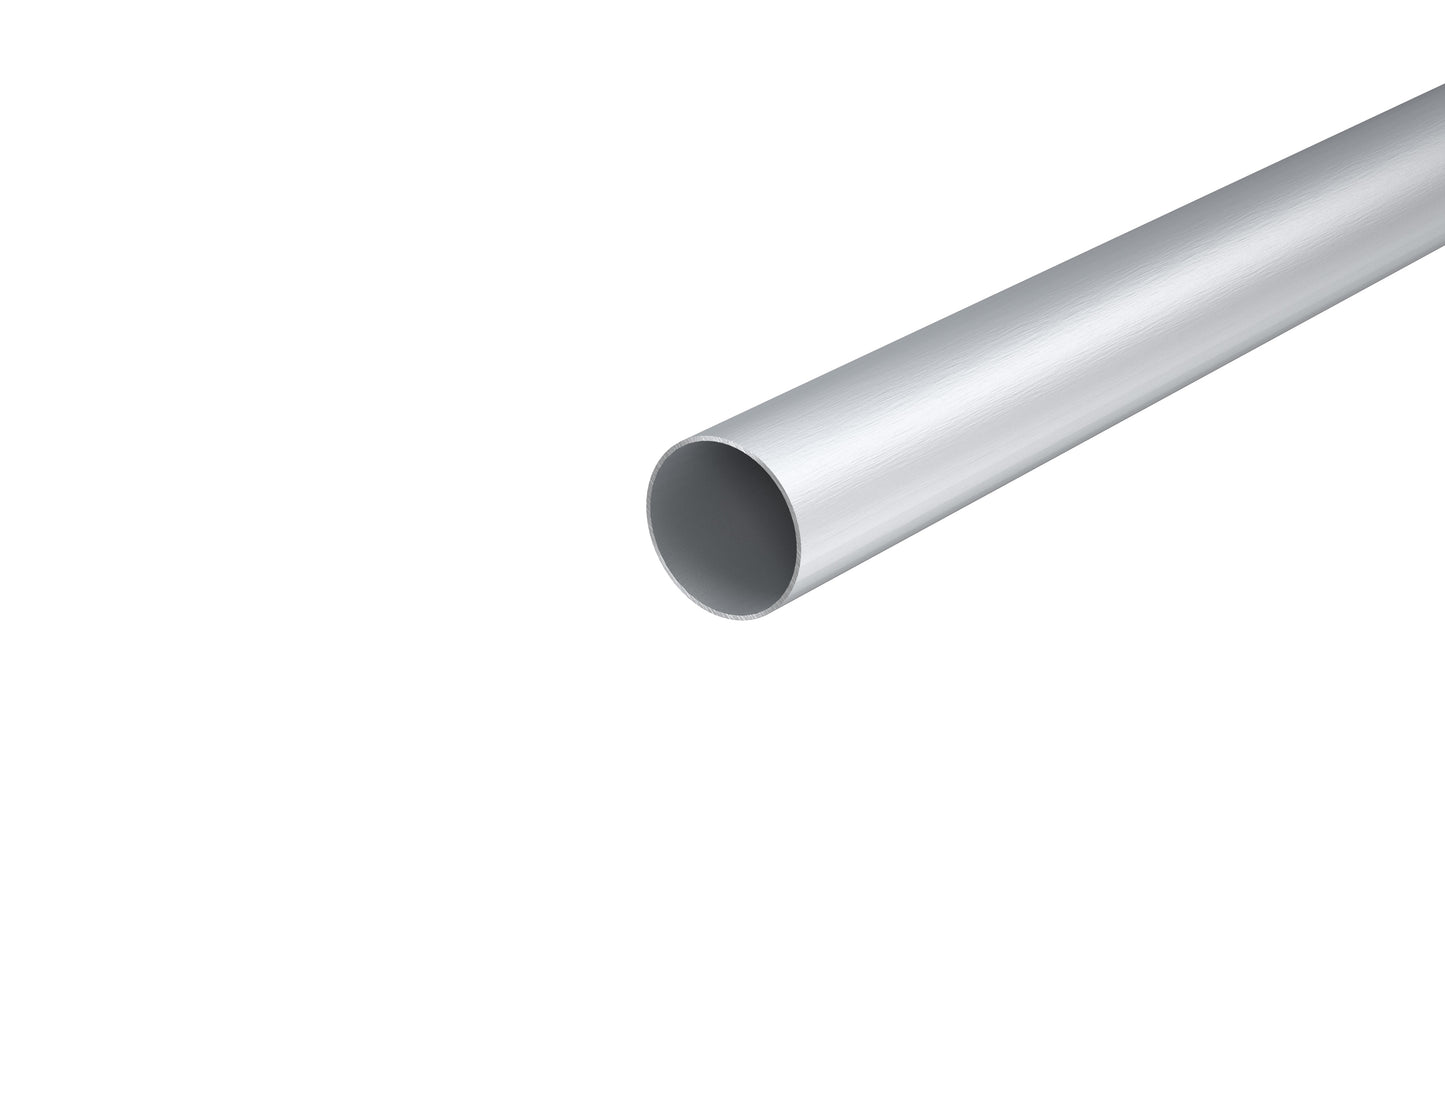 1.5" Diameter x .055" Wall extruded aluminum tube, nearly 0.060" Wall. Rendering is of a thinner wall tube but you get the idea